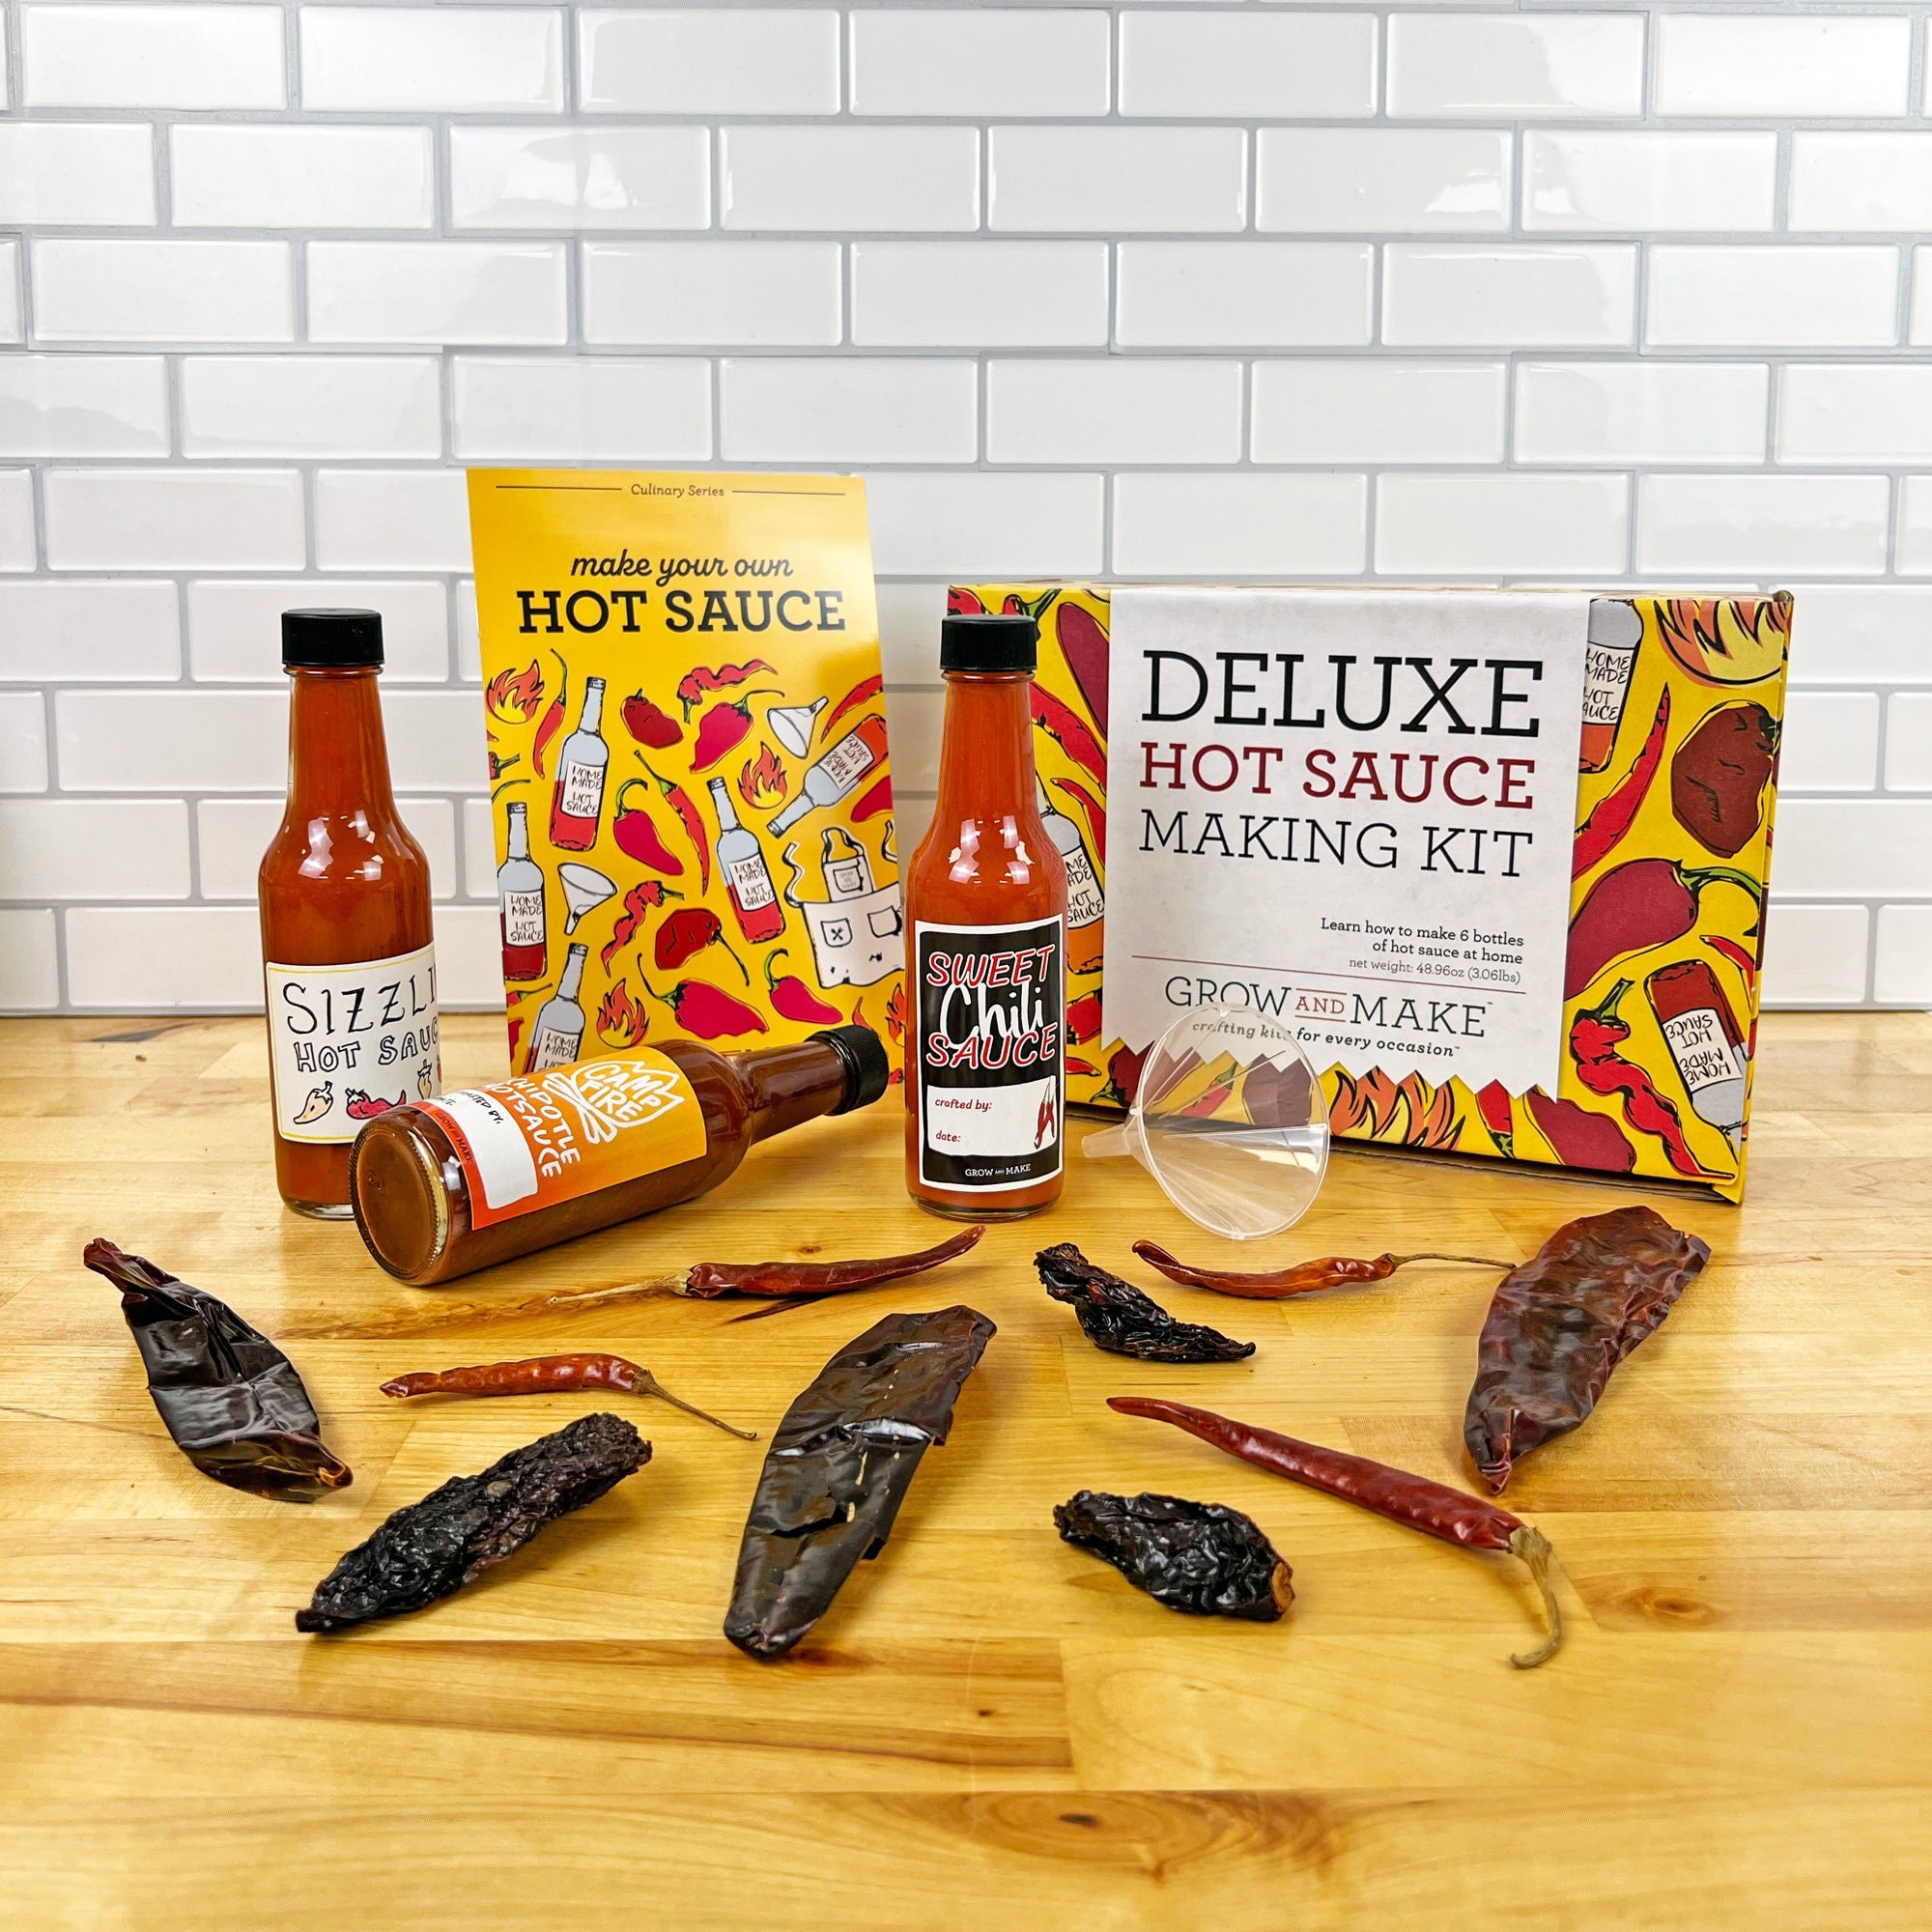 Deluxe Hot Sauce Kit Learn How to Make Your Own Hot Sauce From Home,  Everything Included DIY, Makes 6 Unique Bottles of Sauce, Great Gift 